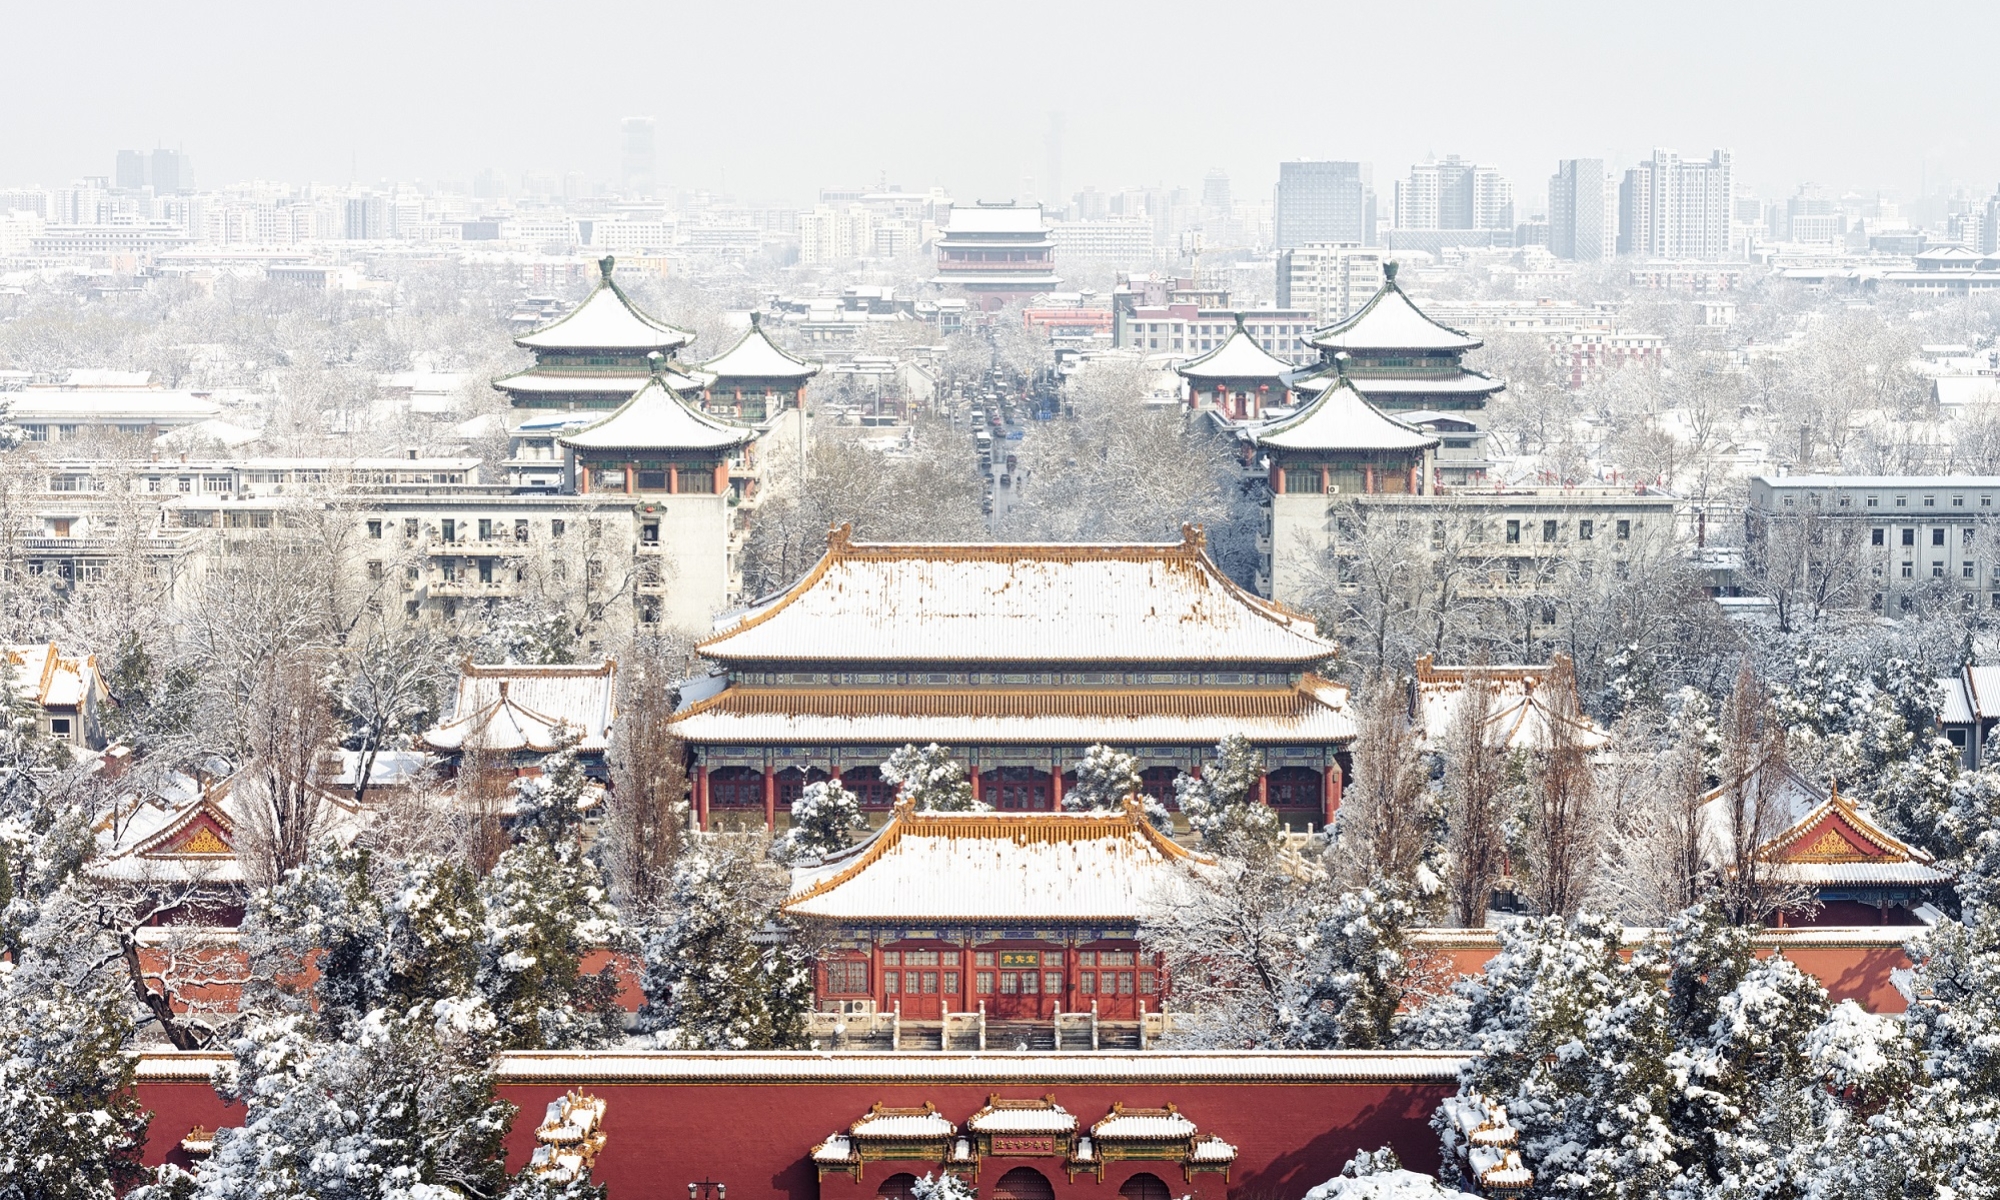 City landscape in China with snow falling over top